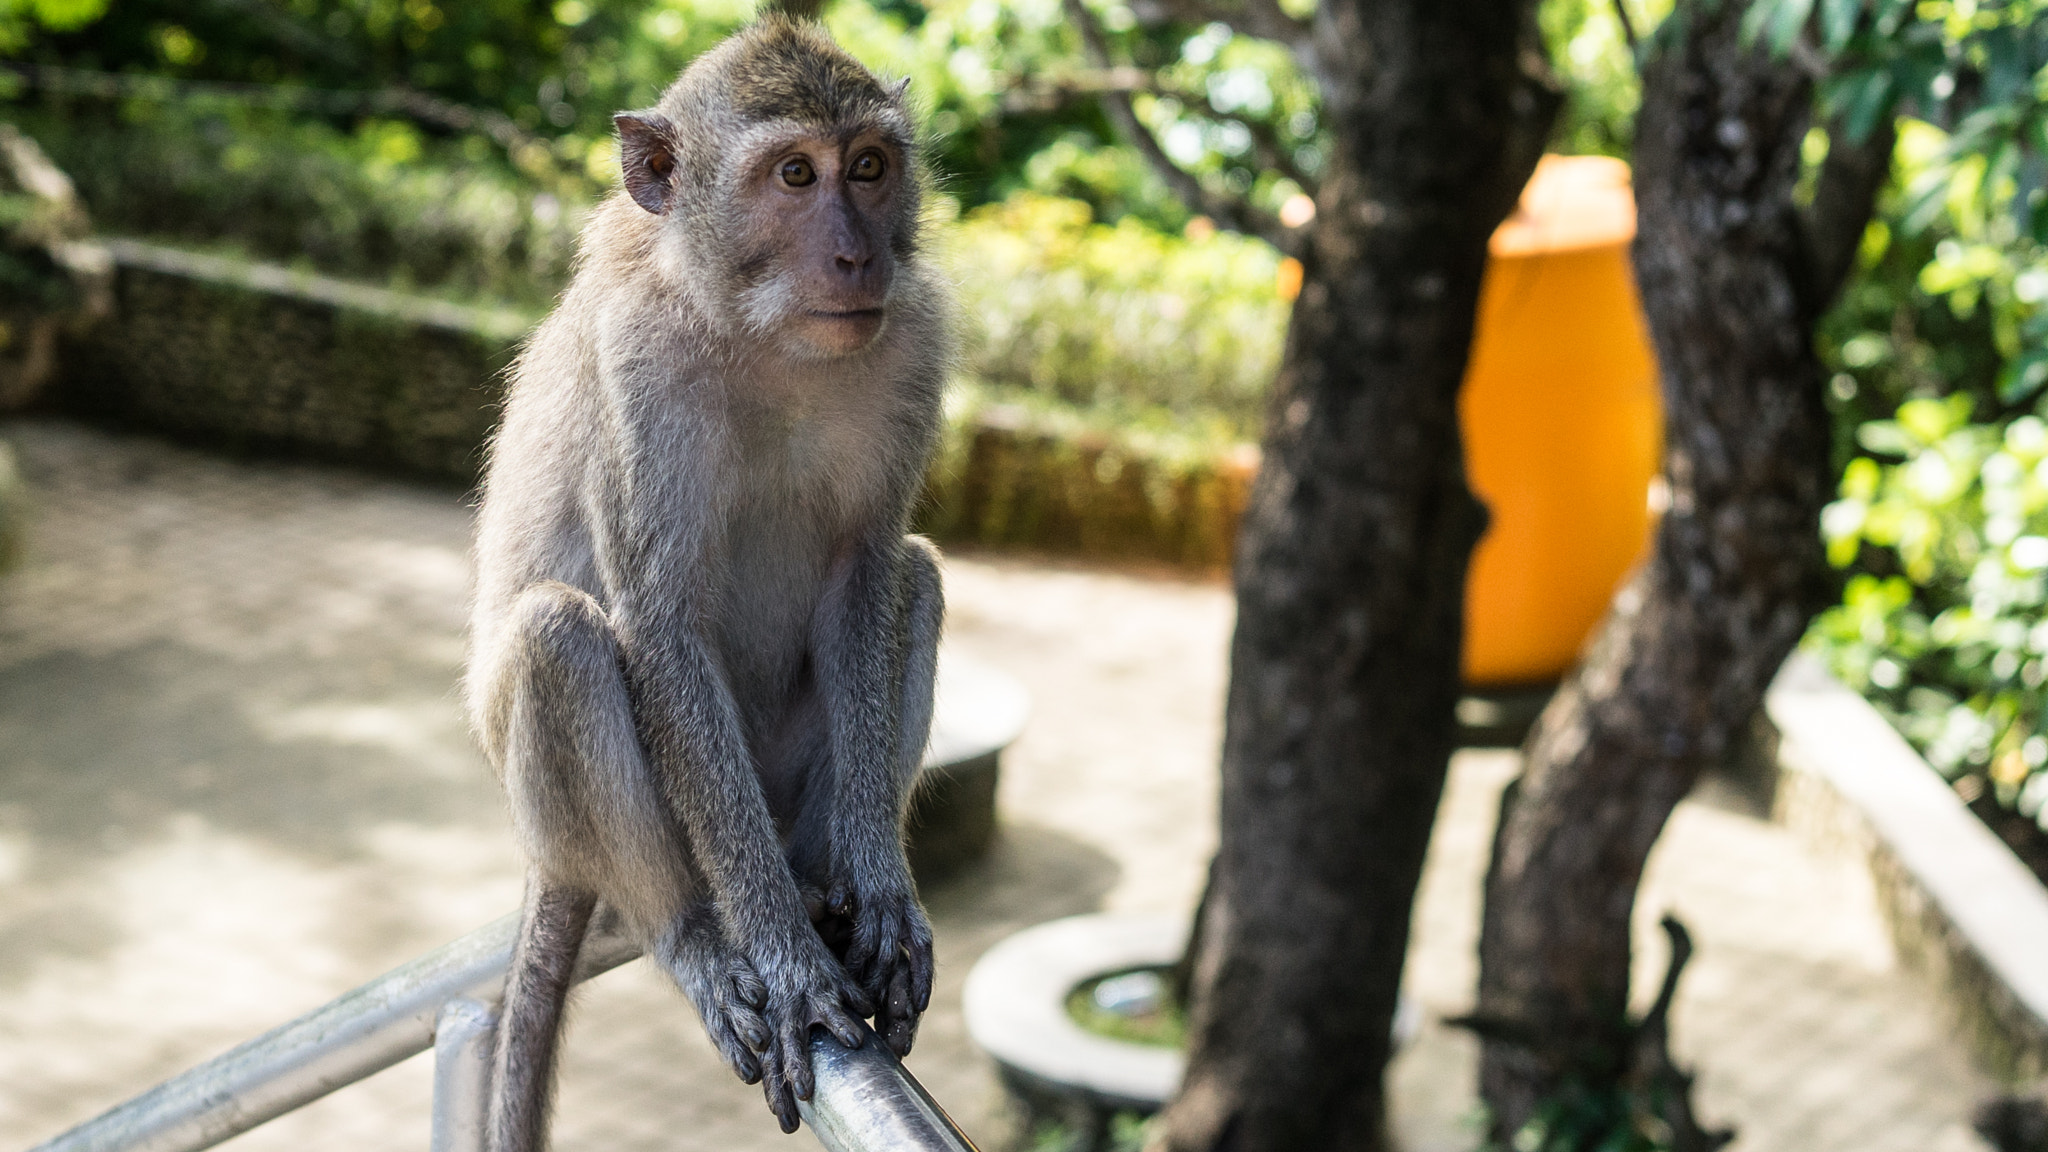 Sony a7 sample photo. Chilling monkey in bali photography